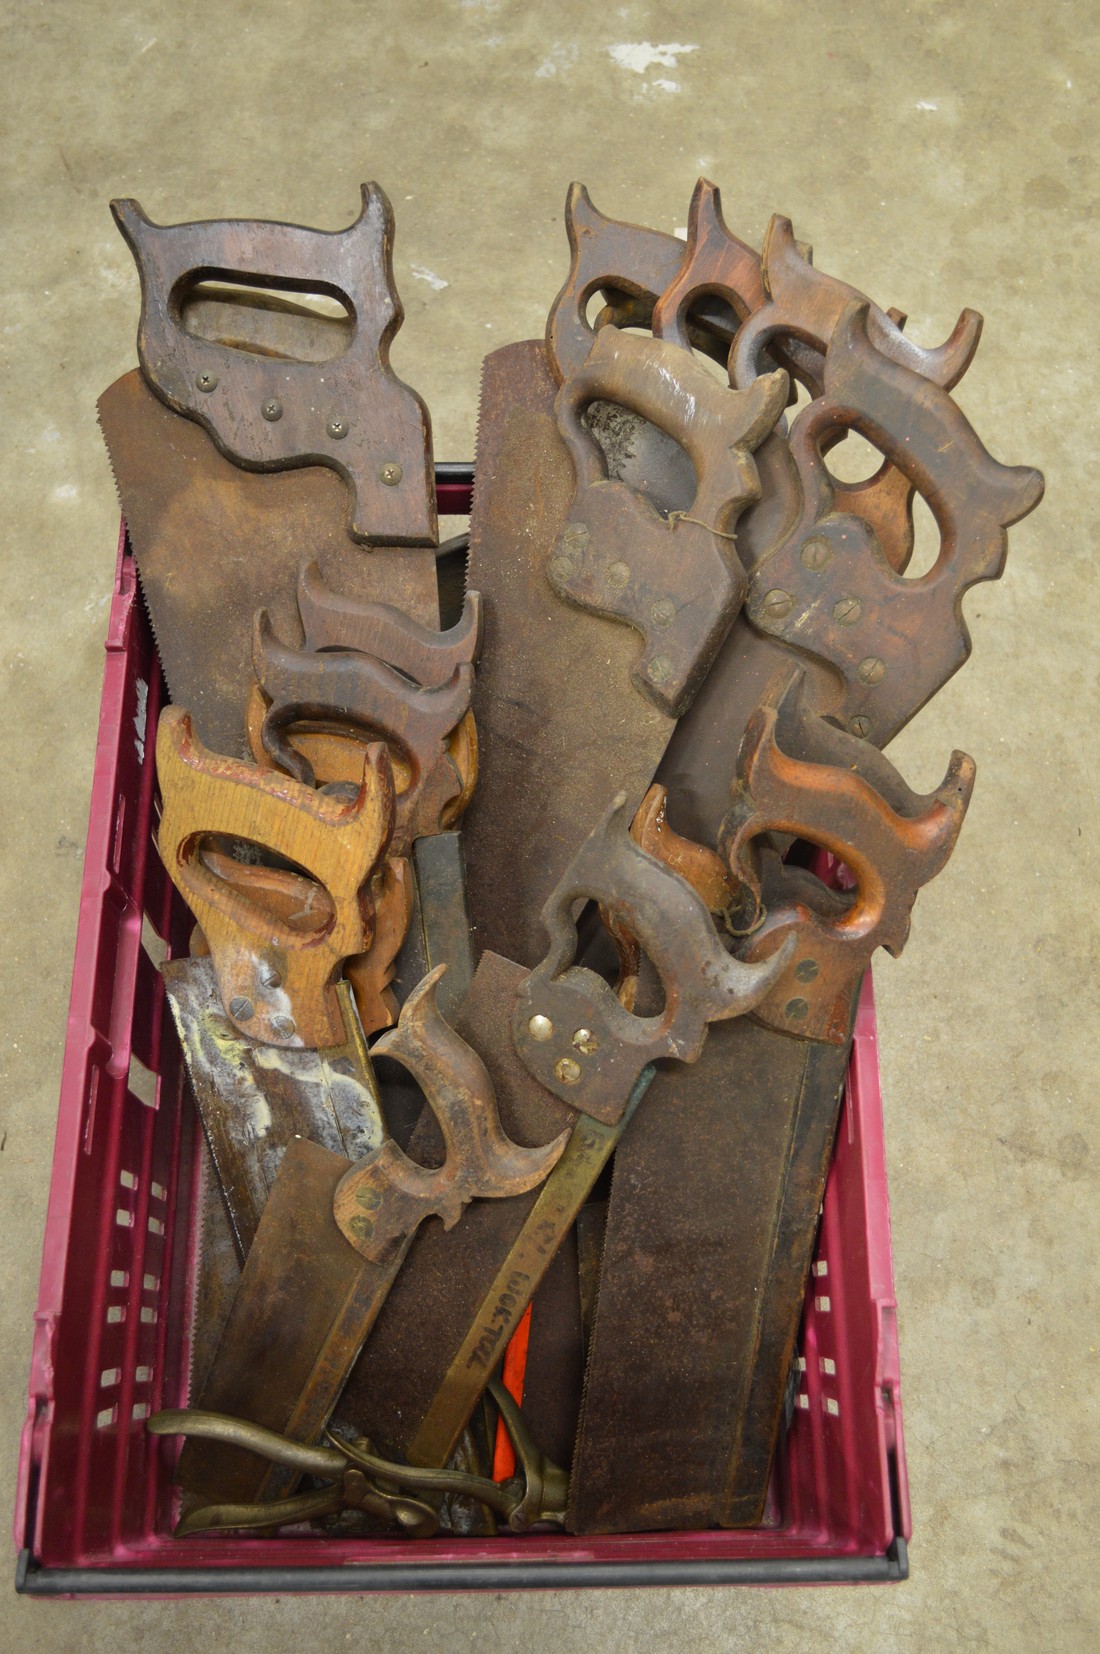 Large quantity of old carpenters saws.